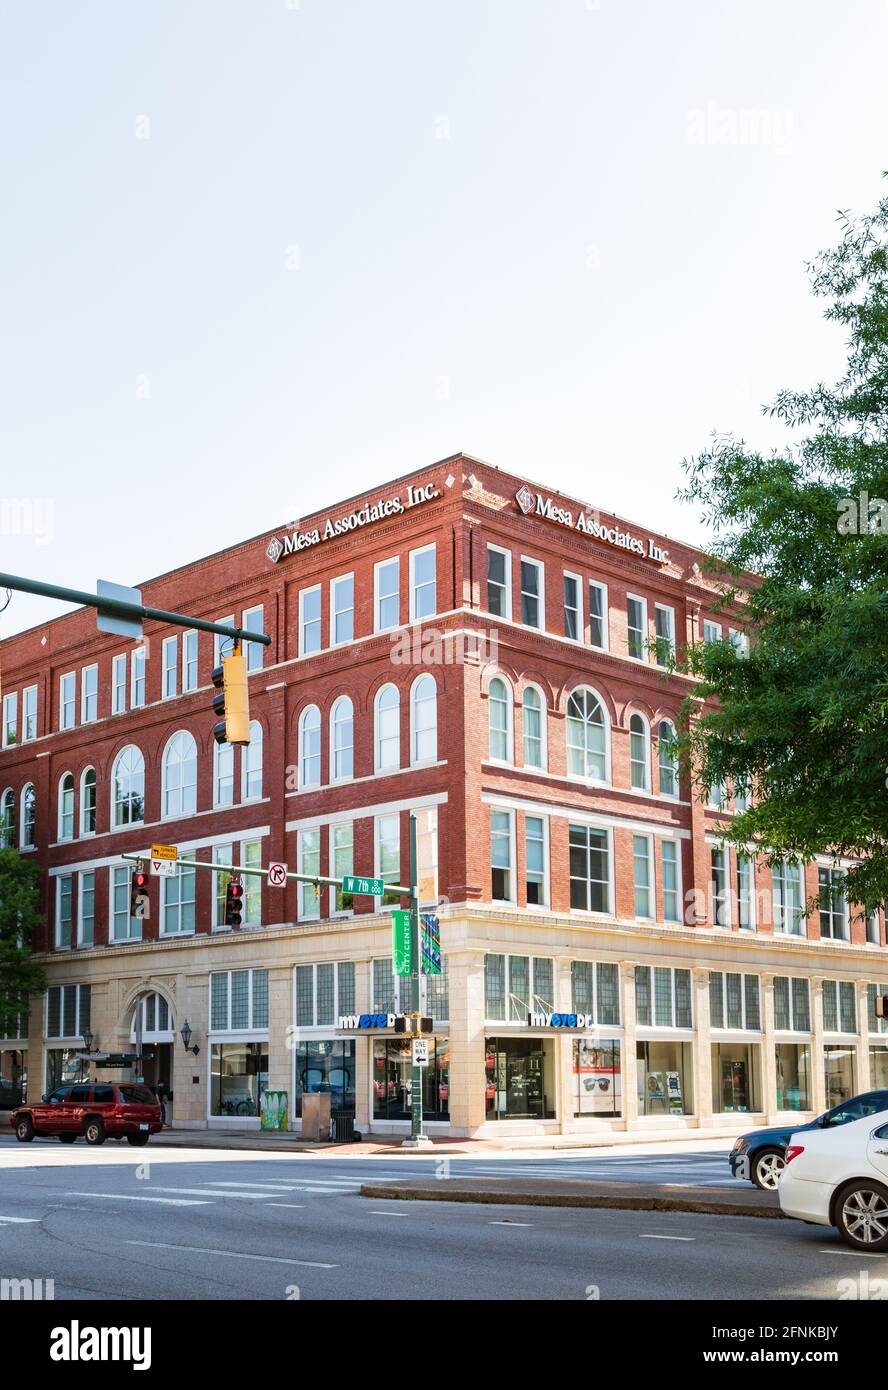 CHATTANOOGA, TN, USA-7 MAY 2021: The Millers Brothers building at Market and 7th, housing Mesa Associates Inc, among othere small businesses. Stock Photo